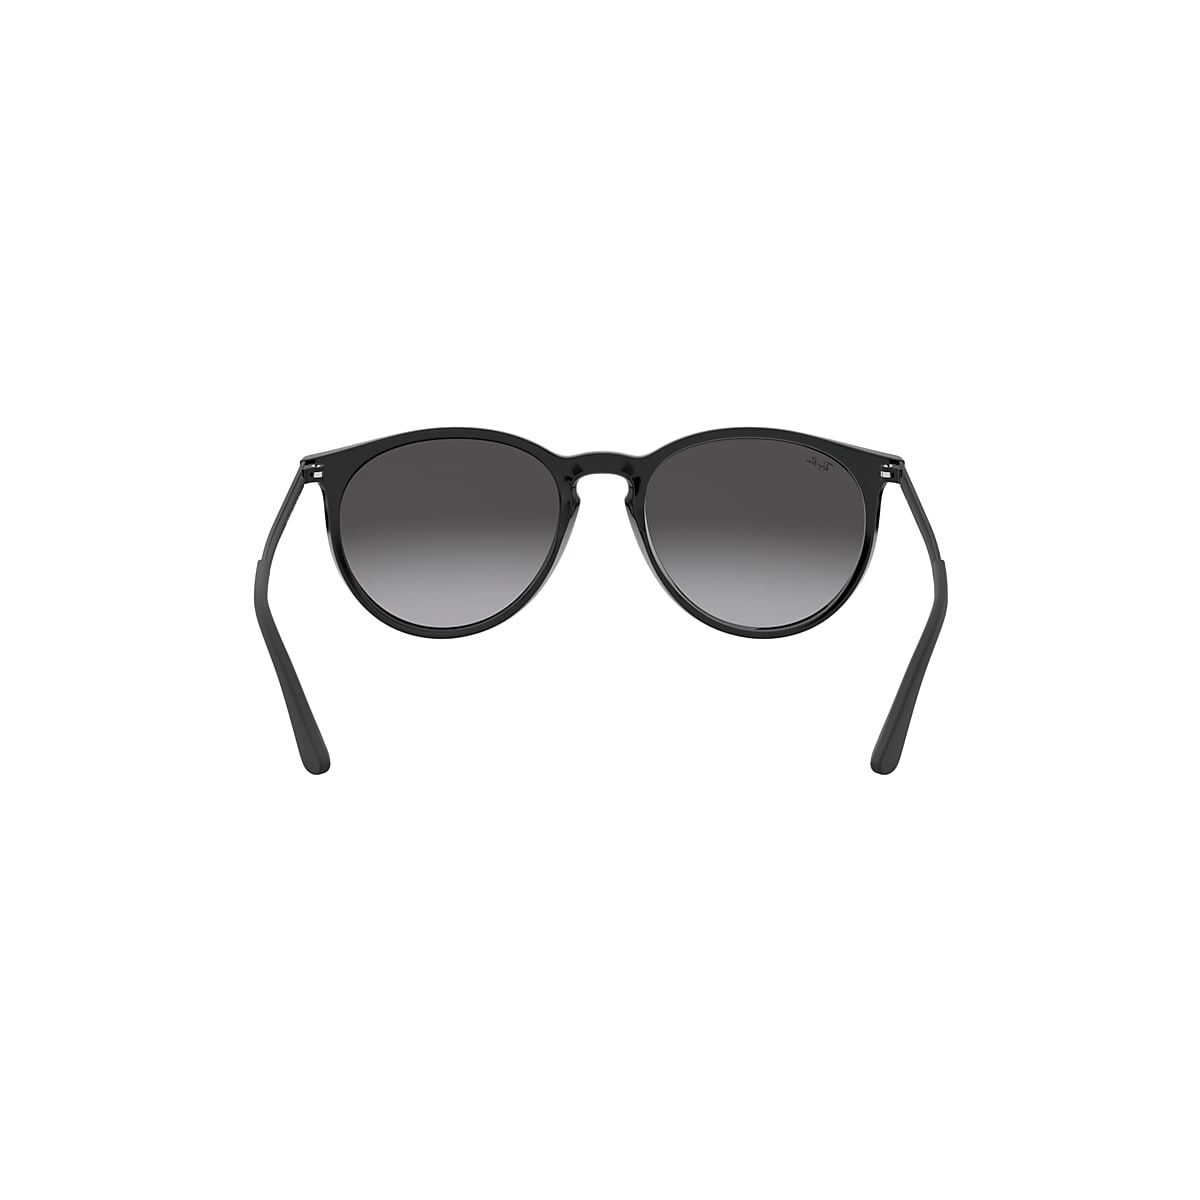 Rb4274 Sunglasses in Black and Grey | Ray-Ban®